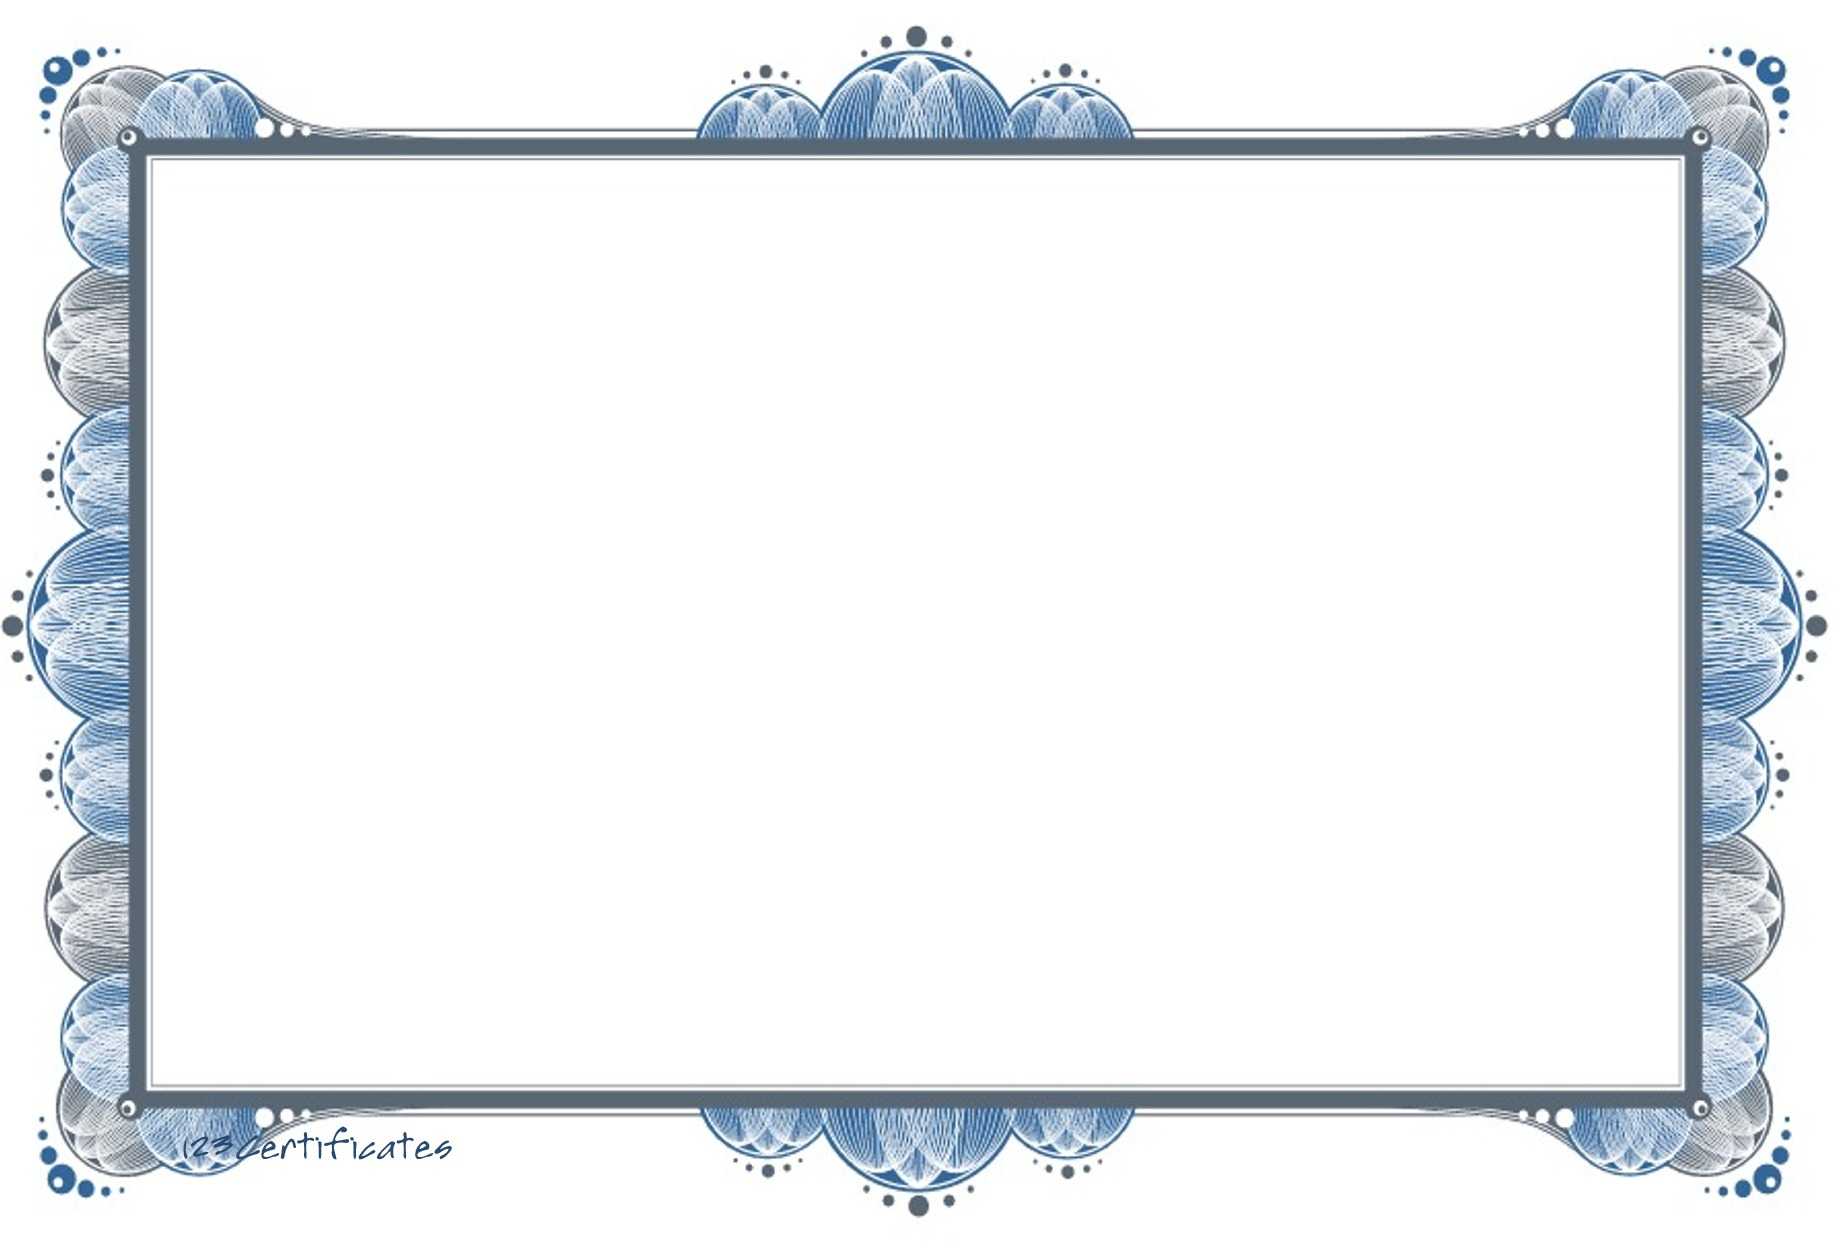 Free Certificate Borders, Download Free Clip Art, Free Clip With Art Certificate Template Free